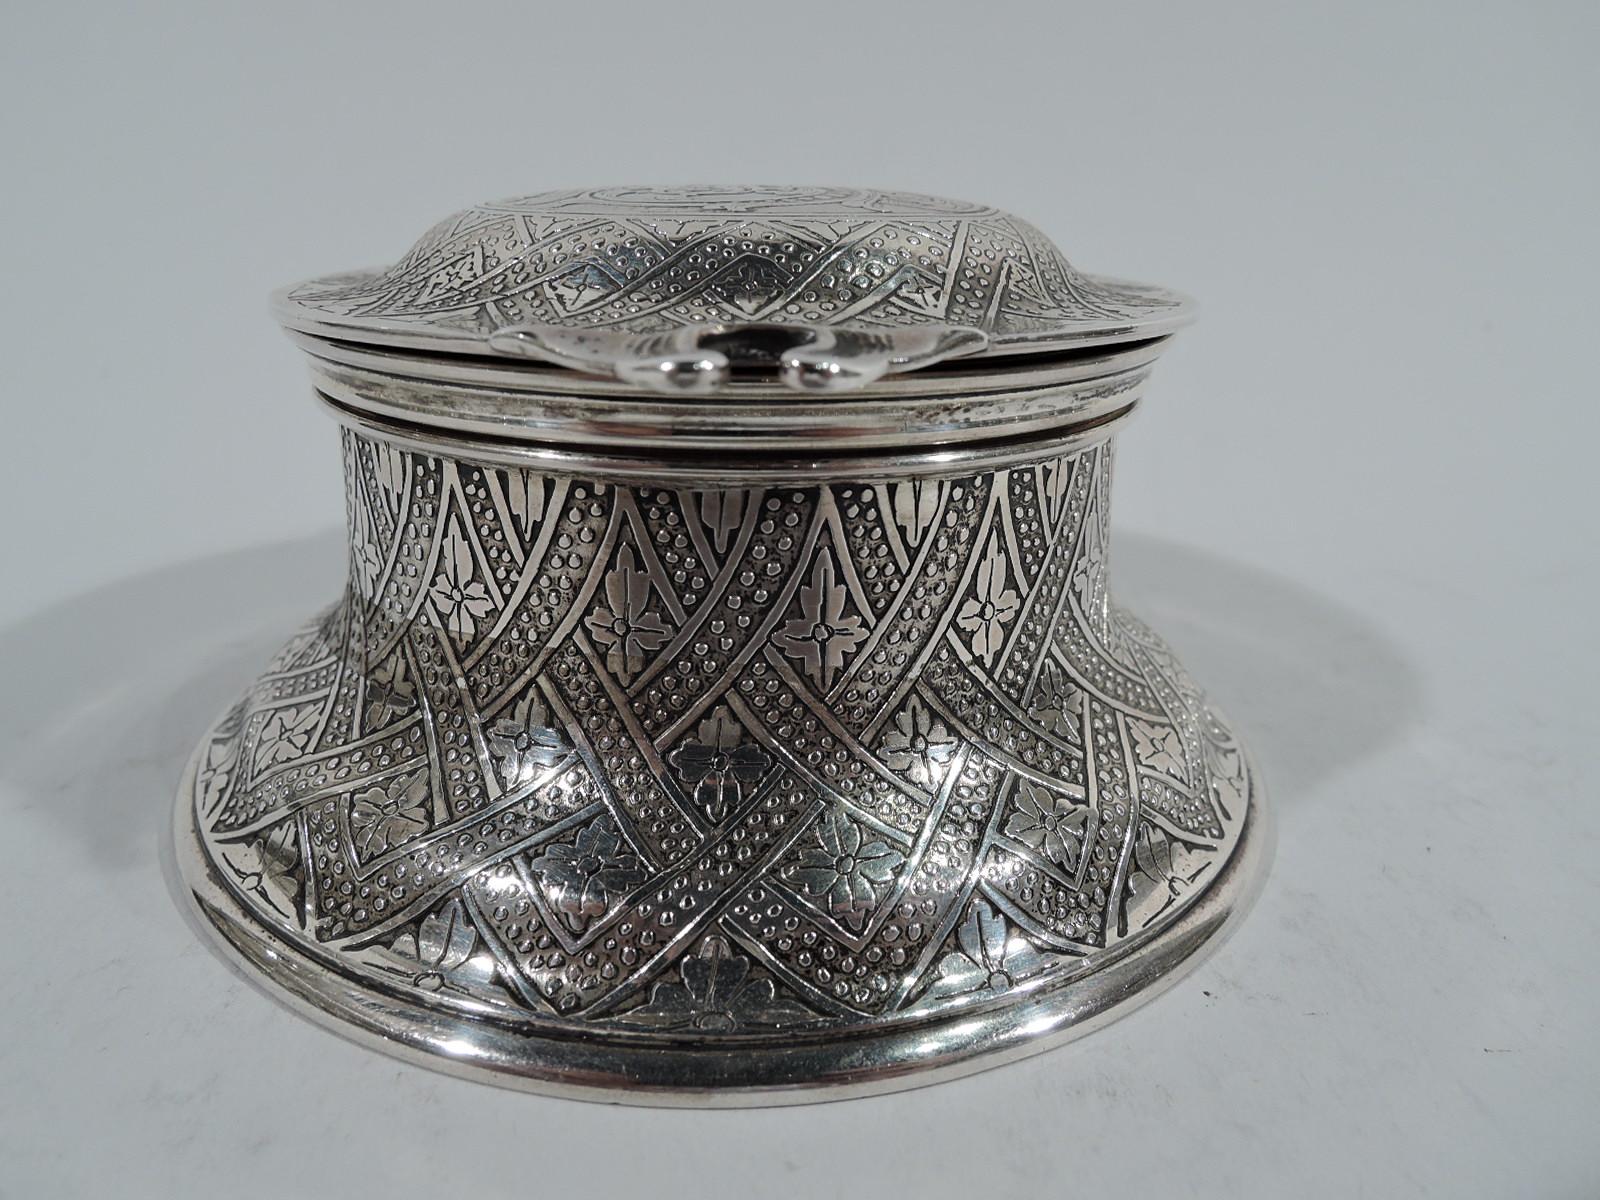 Aesthetic sterling silver inkwell. Made by Tiffany & Co. in New York. Drum-form with spread base. Cover domed with scrolled hinged and tab. Acid-etched ornament: Fluid lattice inset with stylized leaves. Cover top has stylistically-integrated